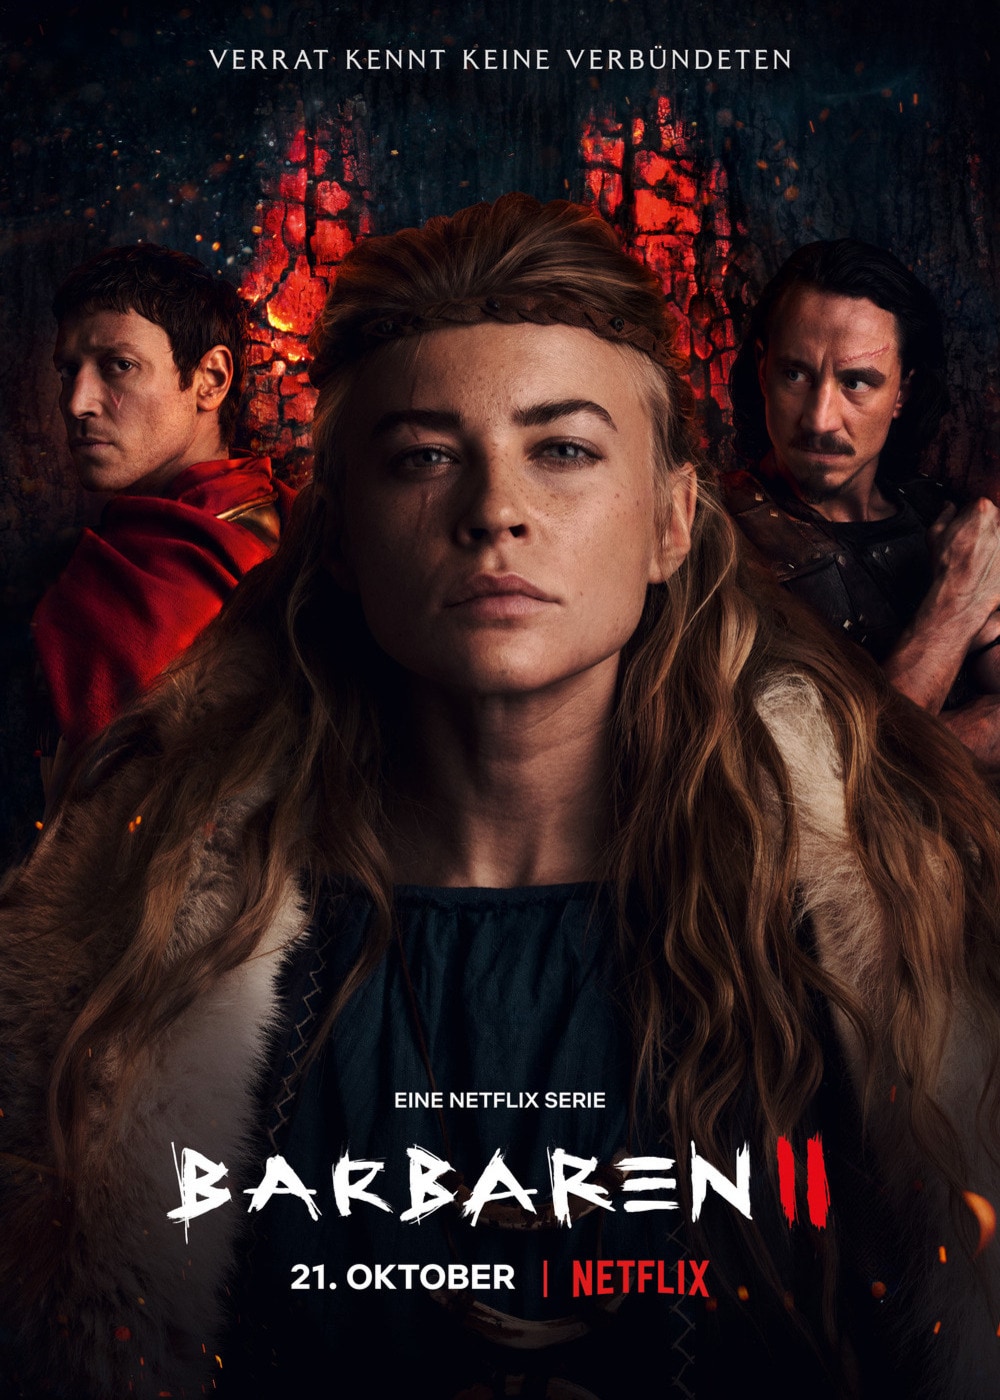 Barbarians Ii Tv Series 2022 Release Date Review Cast Trailer Watch Online At Netflix